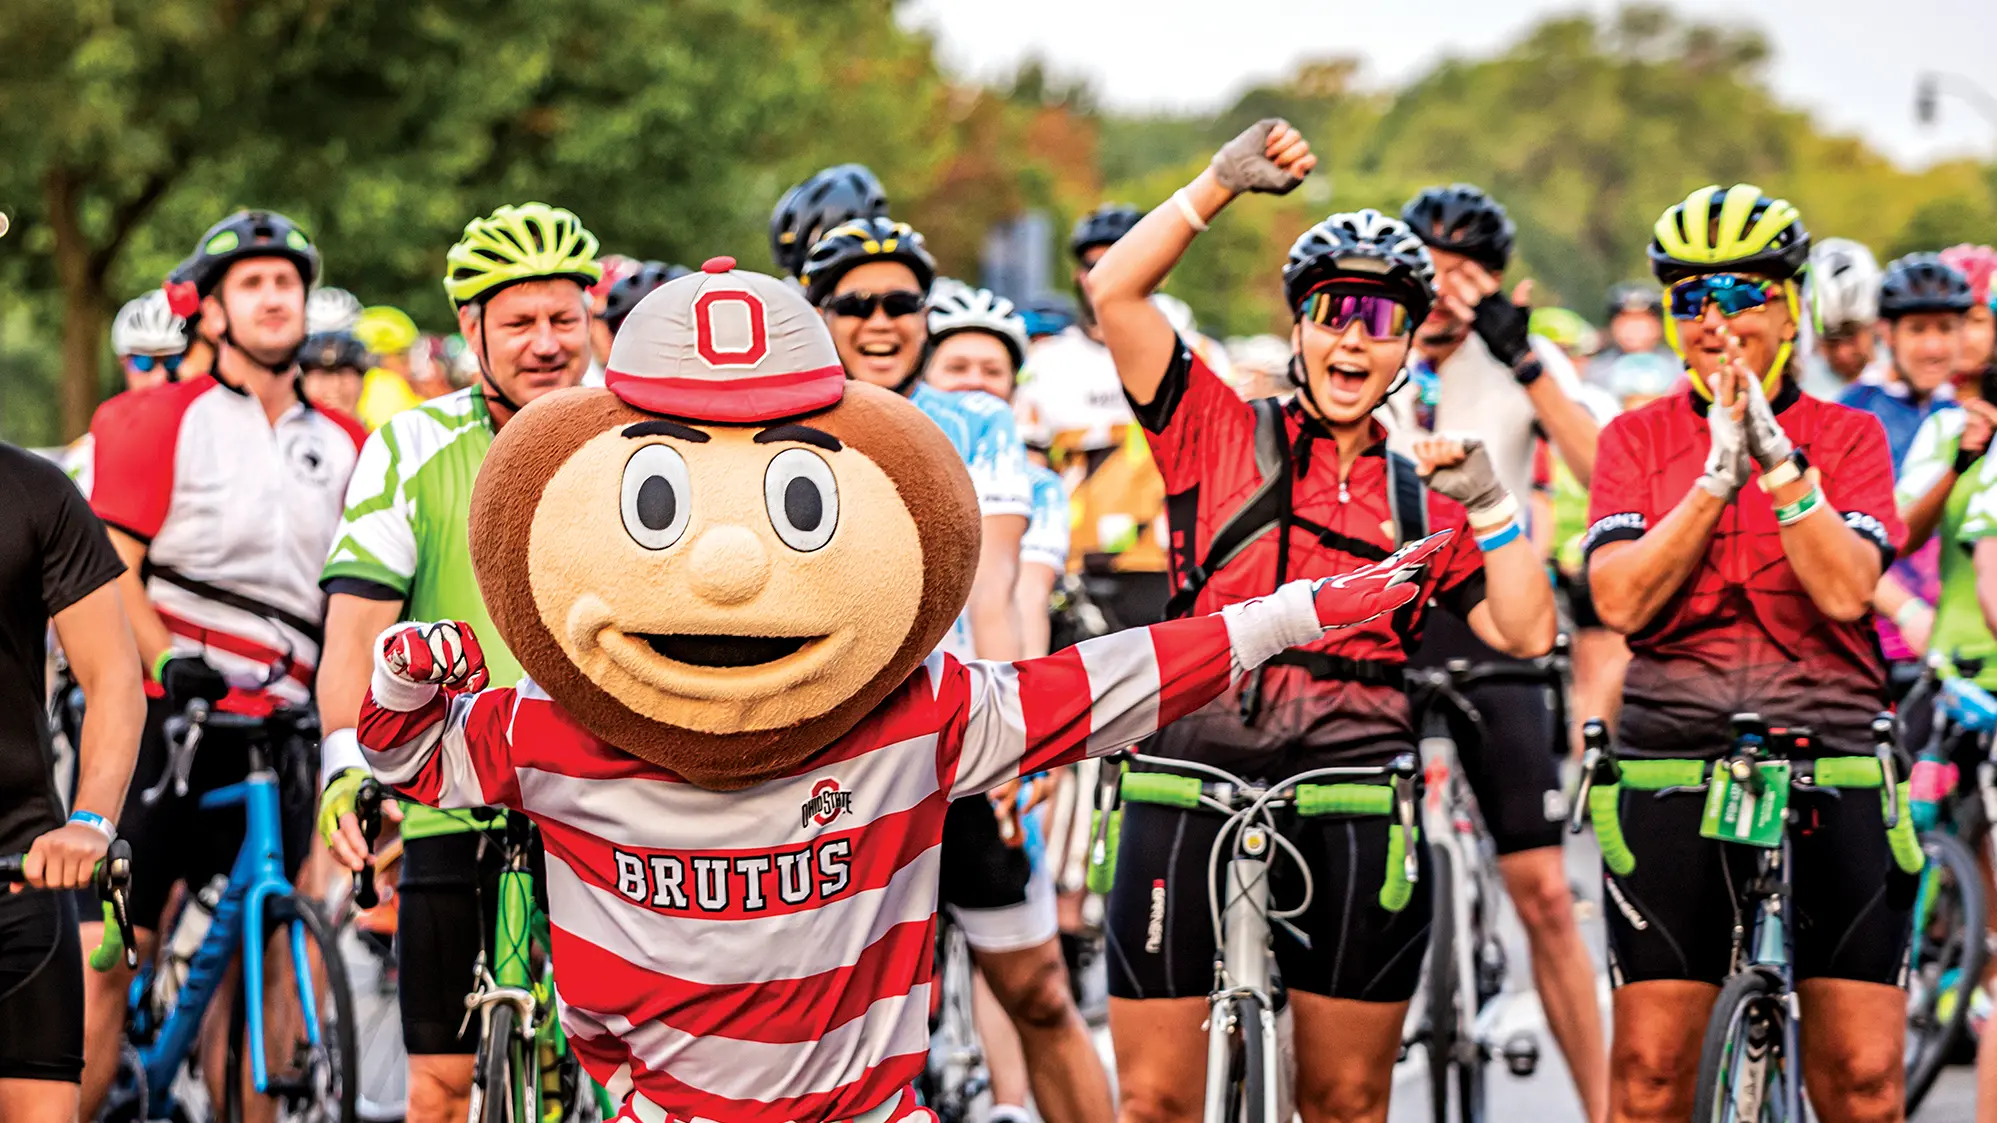 Ohio State’s mascot Brutus Buckeye—who has big head designed to look like a buckeye nut and a regular-sized body wearing a striped, long-sleeved polo shirt—strikes a pose in front of a crowd of cheering riders, each standing over their bicycles and getting ready to start the Pelotonia ride.